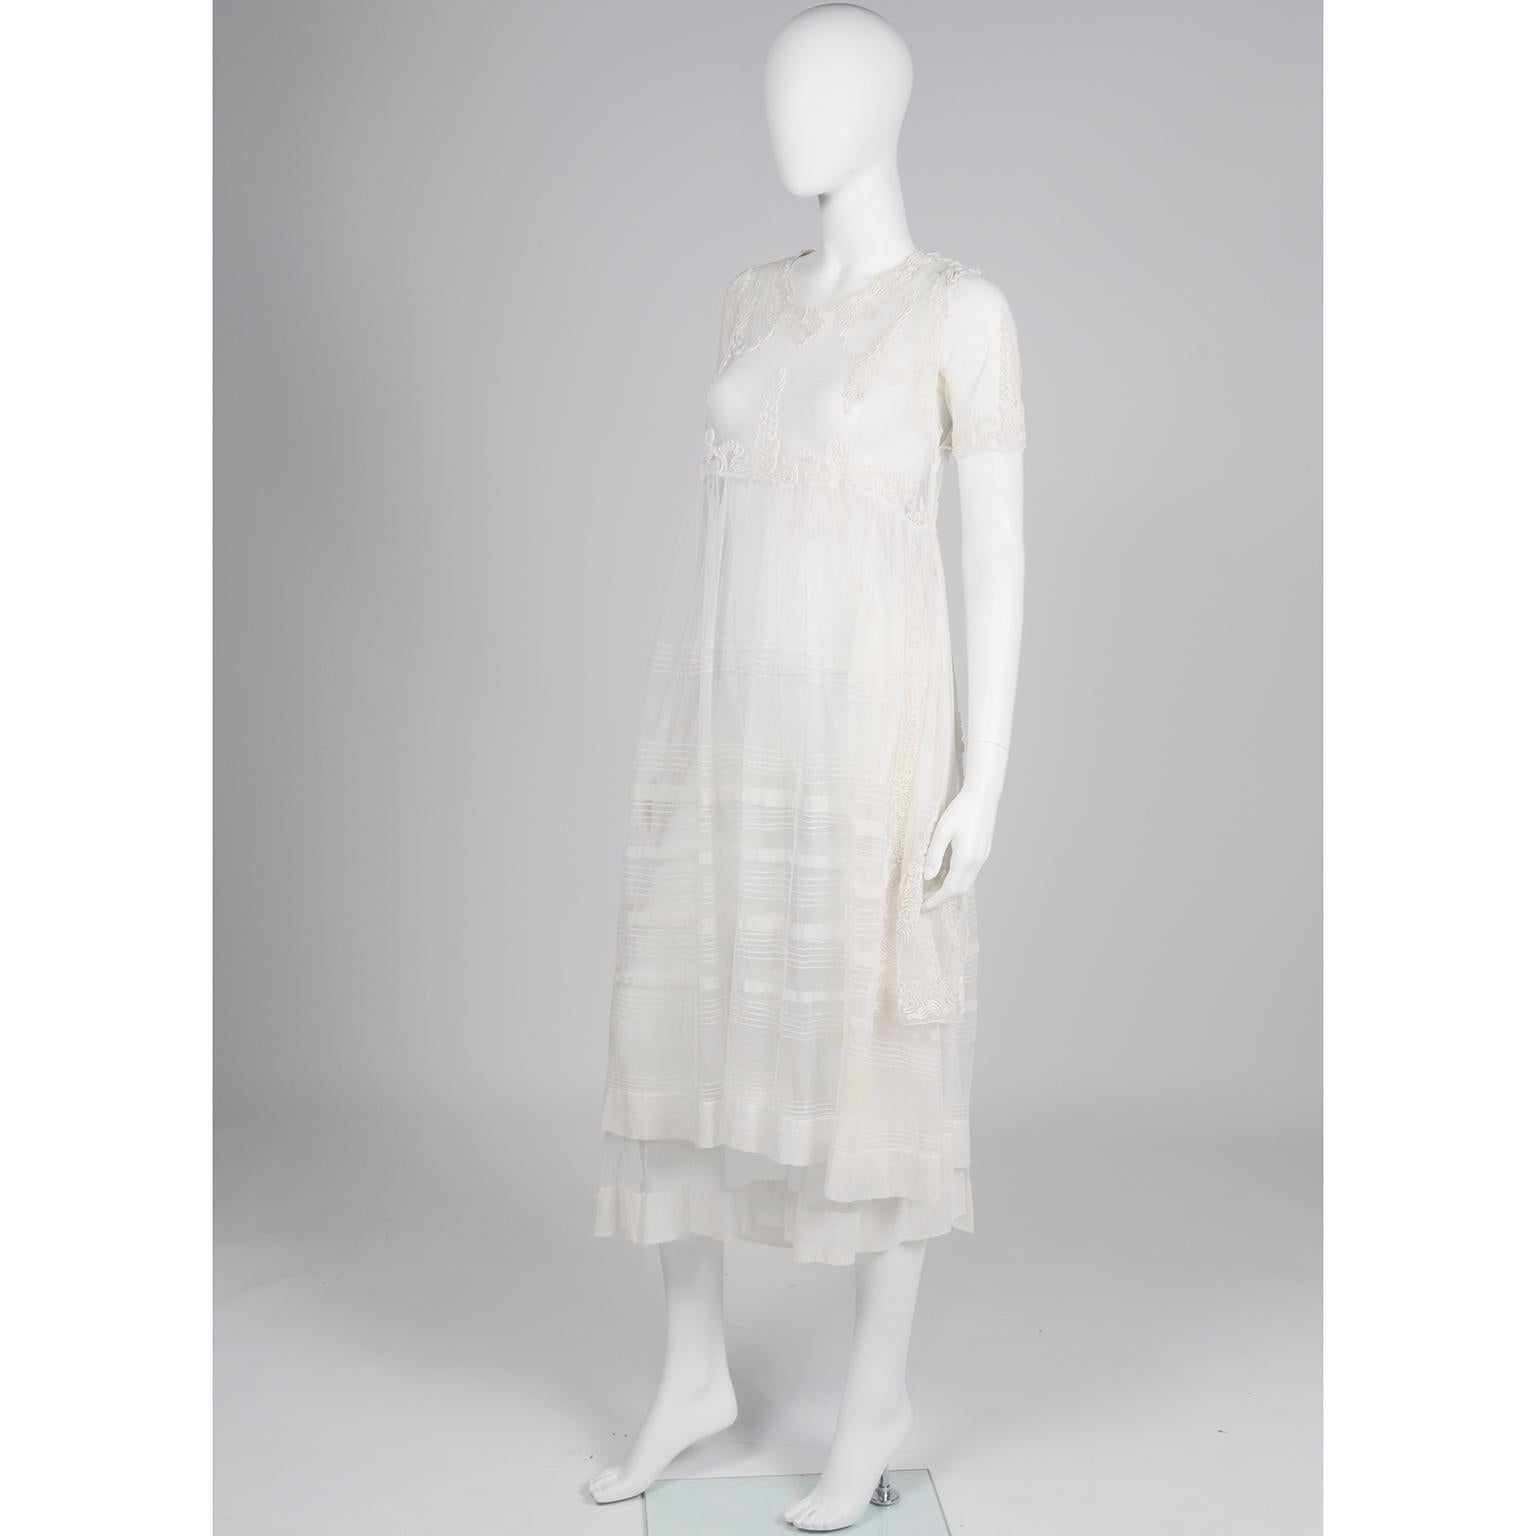 Antique Edwardian 1910s Vintage Ivory Net Tulle Dress W Soutache Embroidery Trim In Good Condition For Sale In Portland, OR